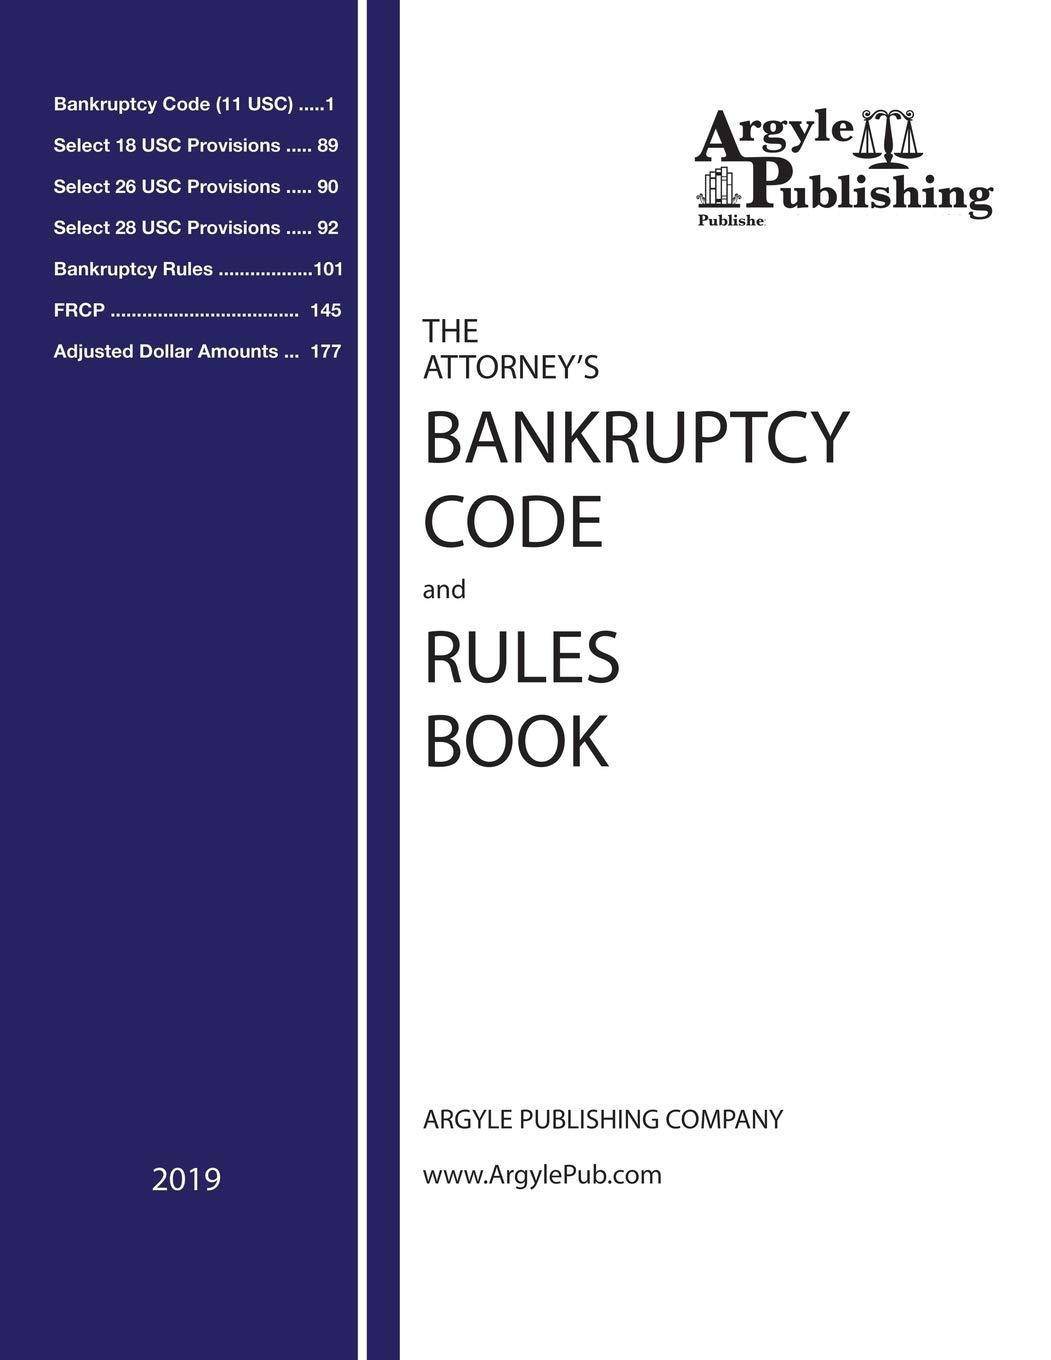 The Attorney's Bankruptcy Code and Rules Book - SureShot Books Publishing LLC